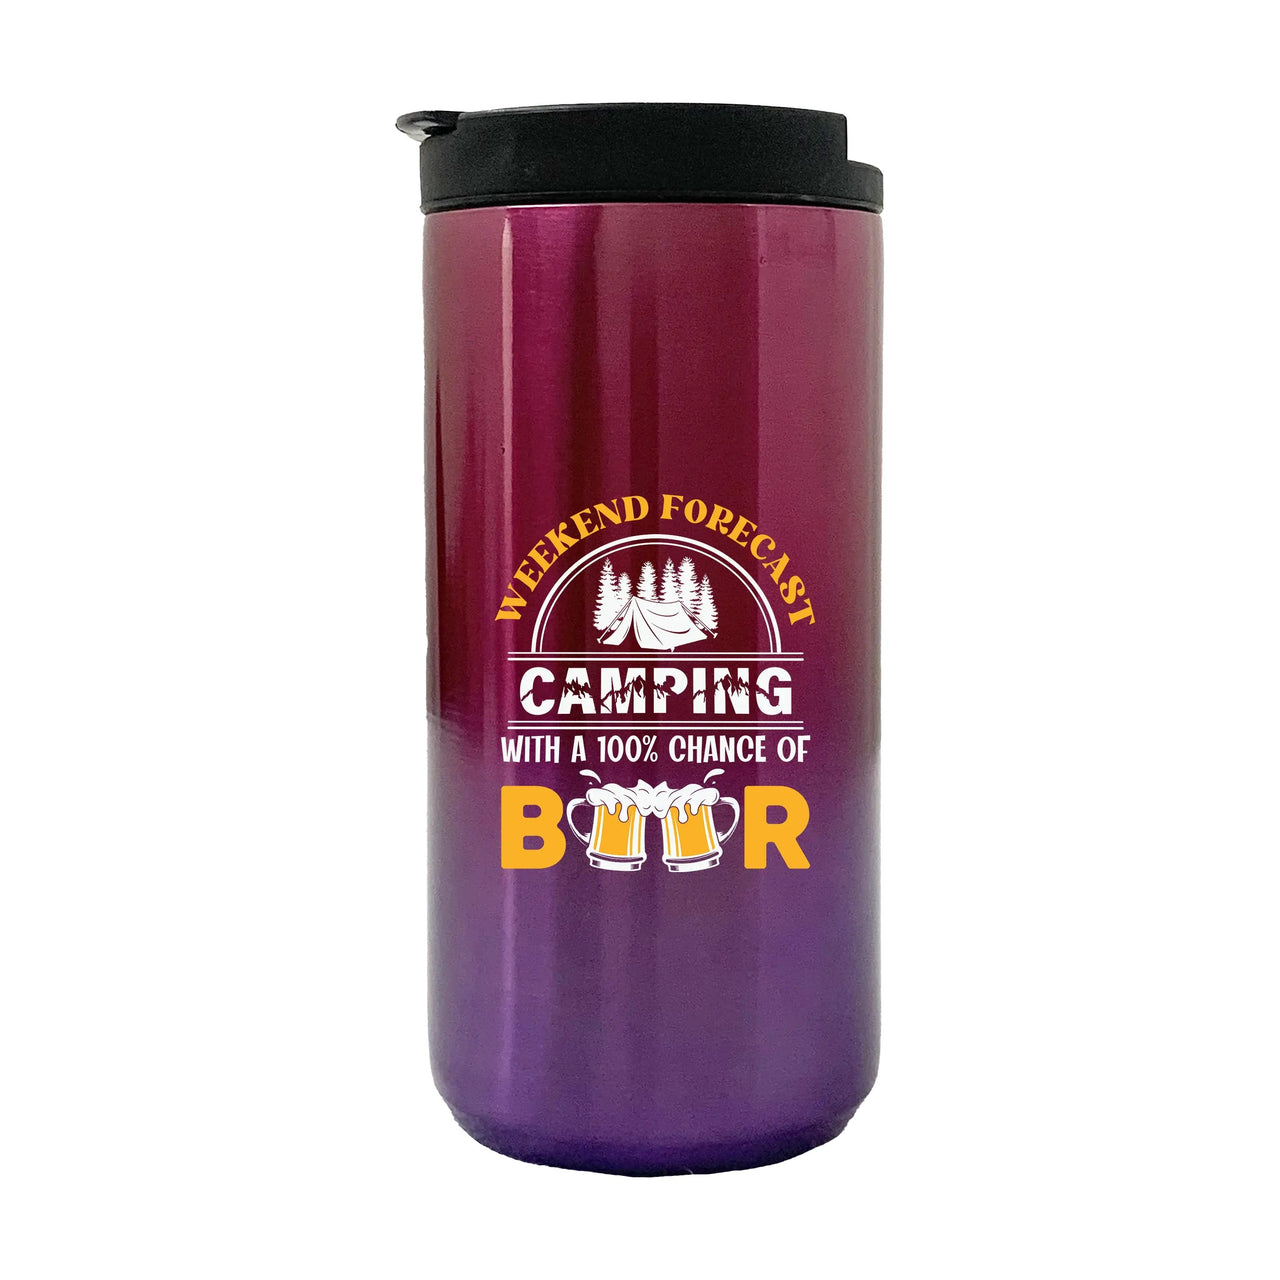 Weekend Forecast, Camping with 100% Beer 14oz Coffee Tumbler